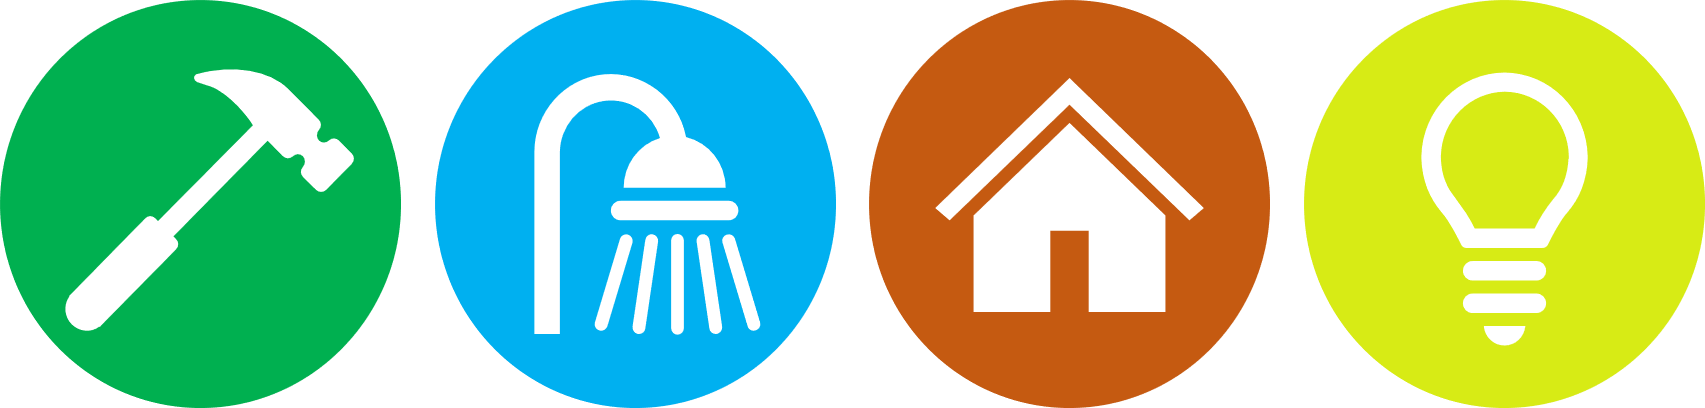 Handyman Services Icons PNG image